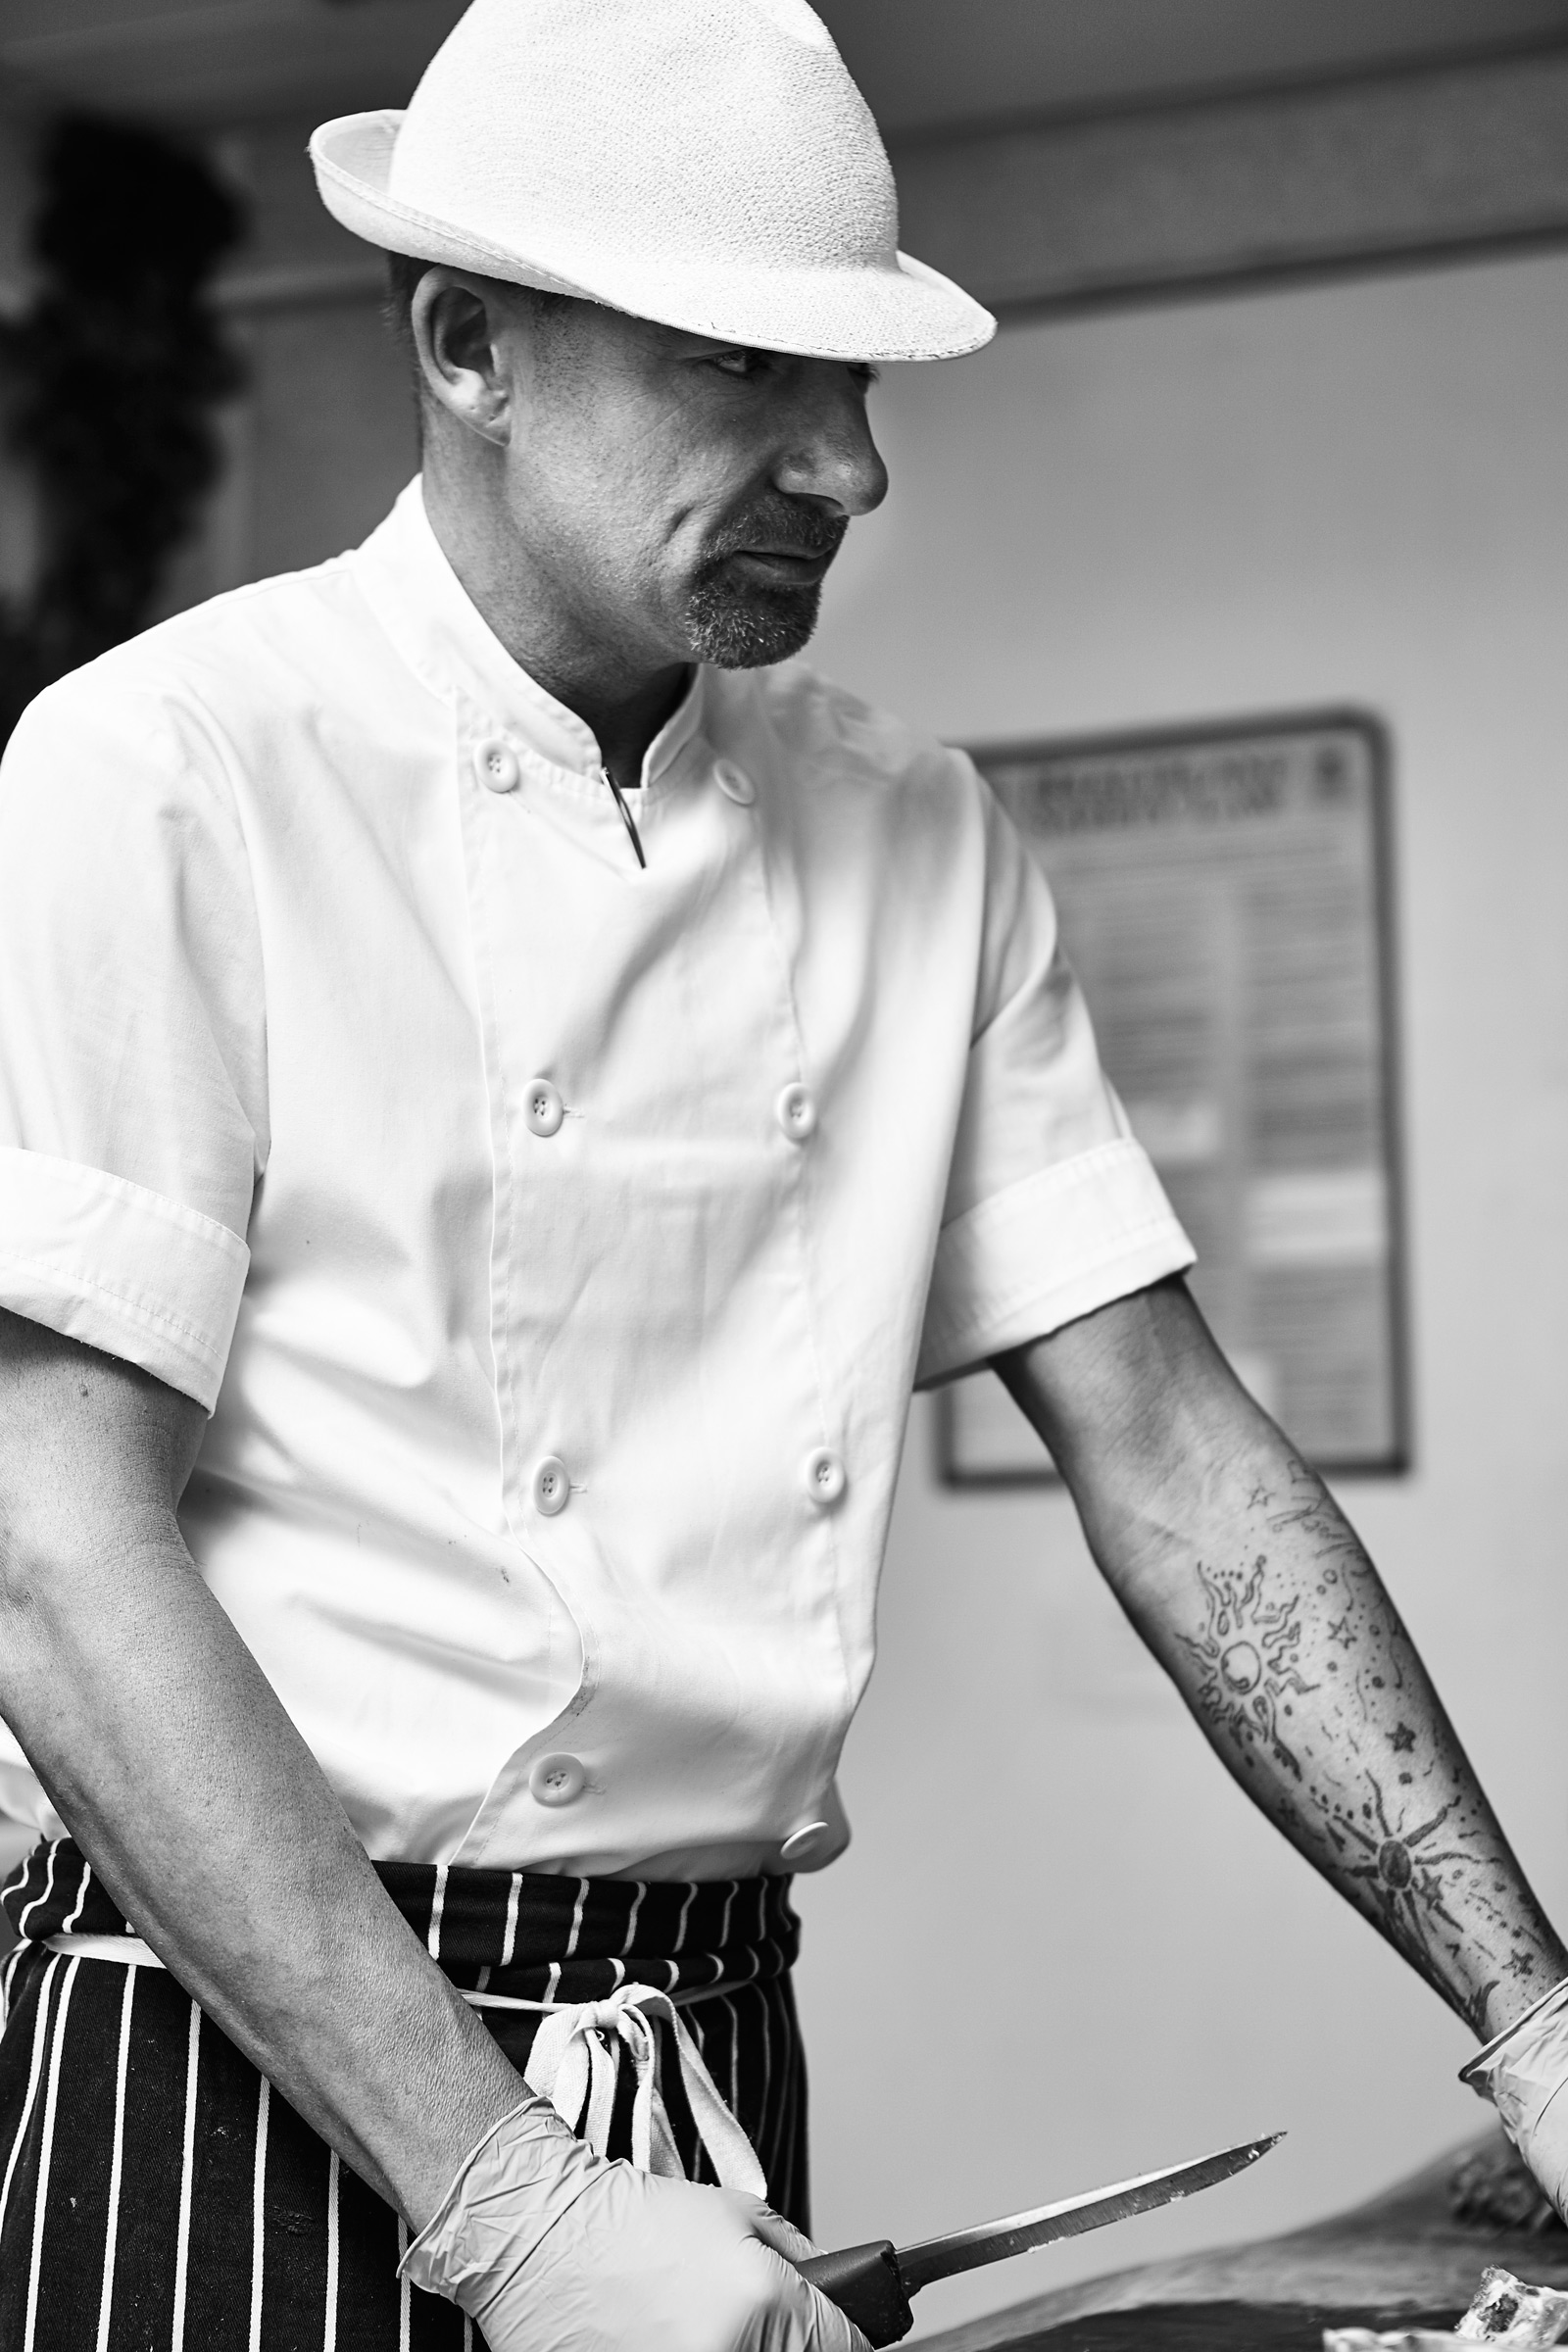 Peter Whitecross Butcher, portrait photography for editorial project by Alastair Ferrier food and drink photographer